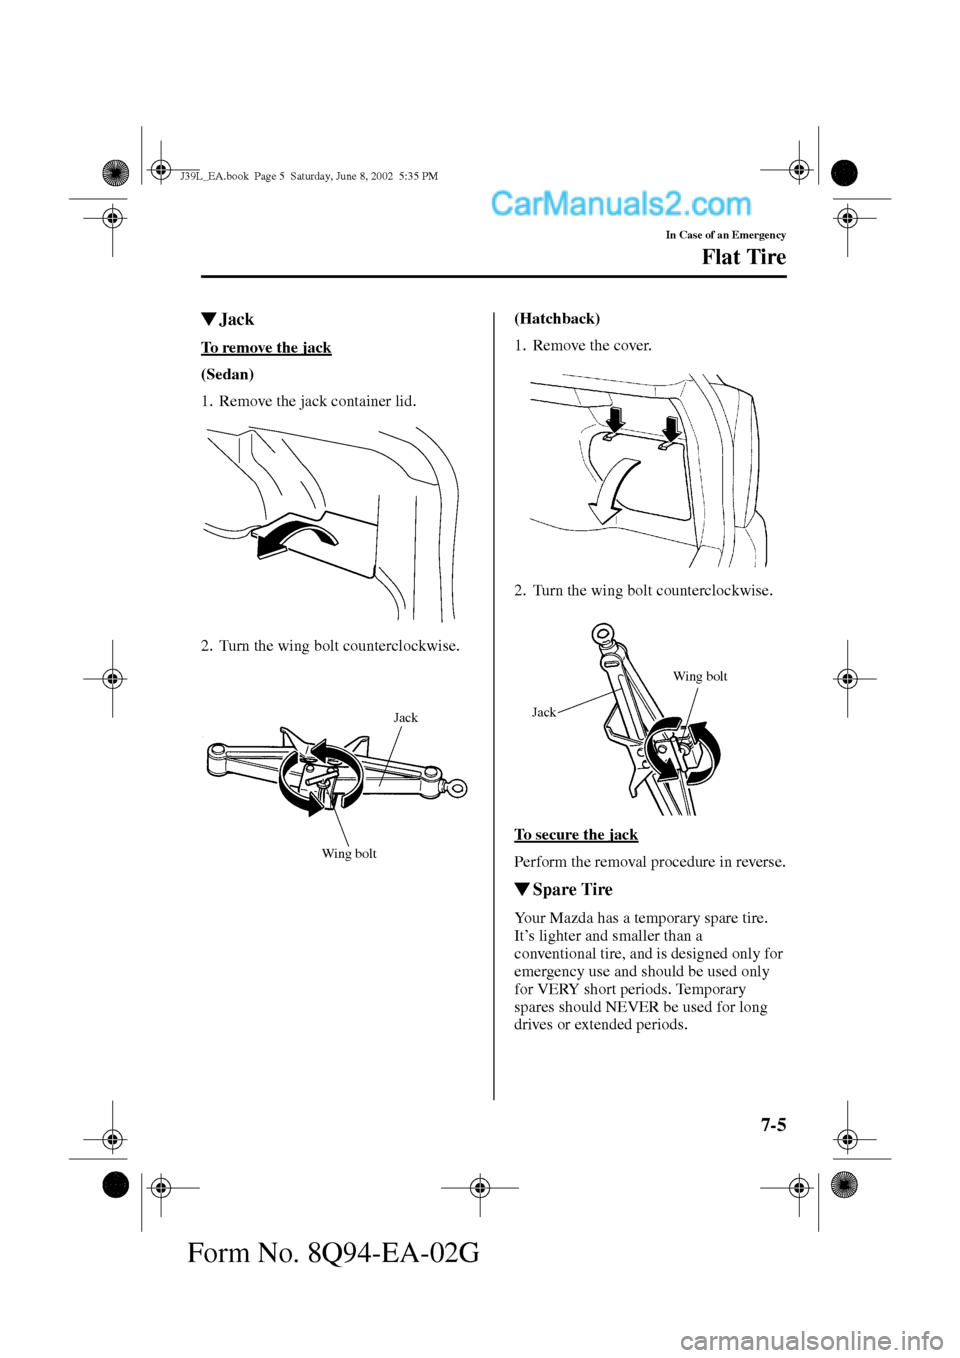 MAZDA MODEL PROTÉGÉ 2003  Owners Manual (in English) 7-5
In Case of an Emergency
Flat Tire
Form No. 8Q94-EA-02G
Jack
To remove the jack
(Sedan) 
1. Remove the jack container lid.
2. Turn the wing bolt counterclockwise.(Hatchback) 
1. Remove the cover.
